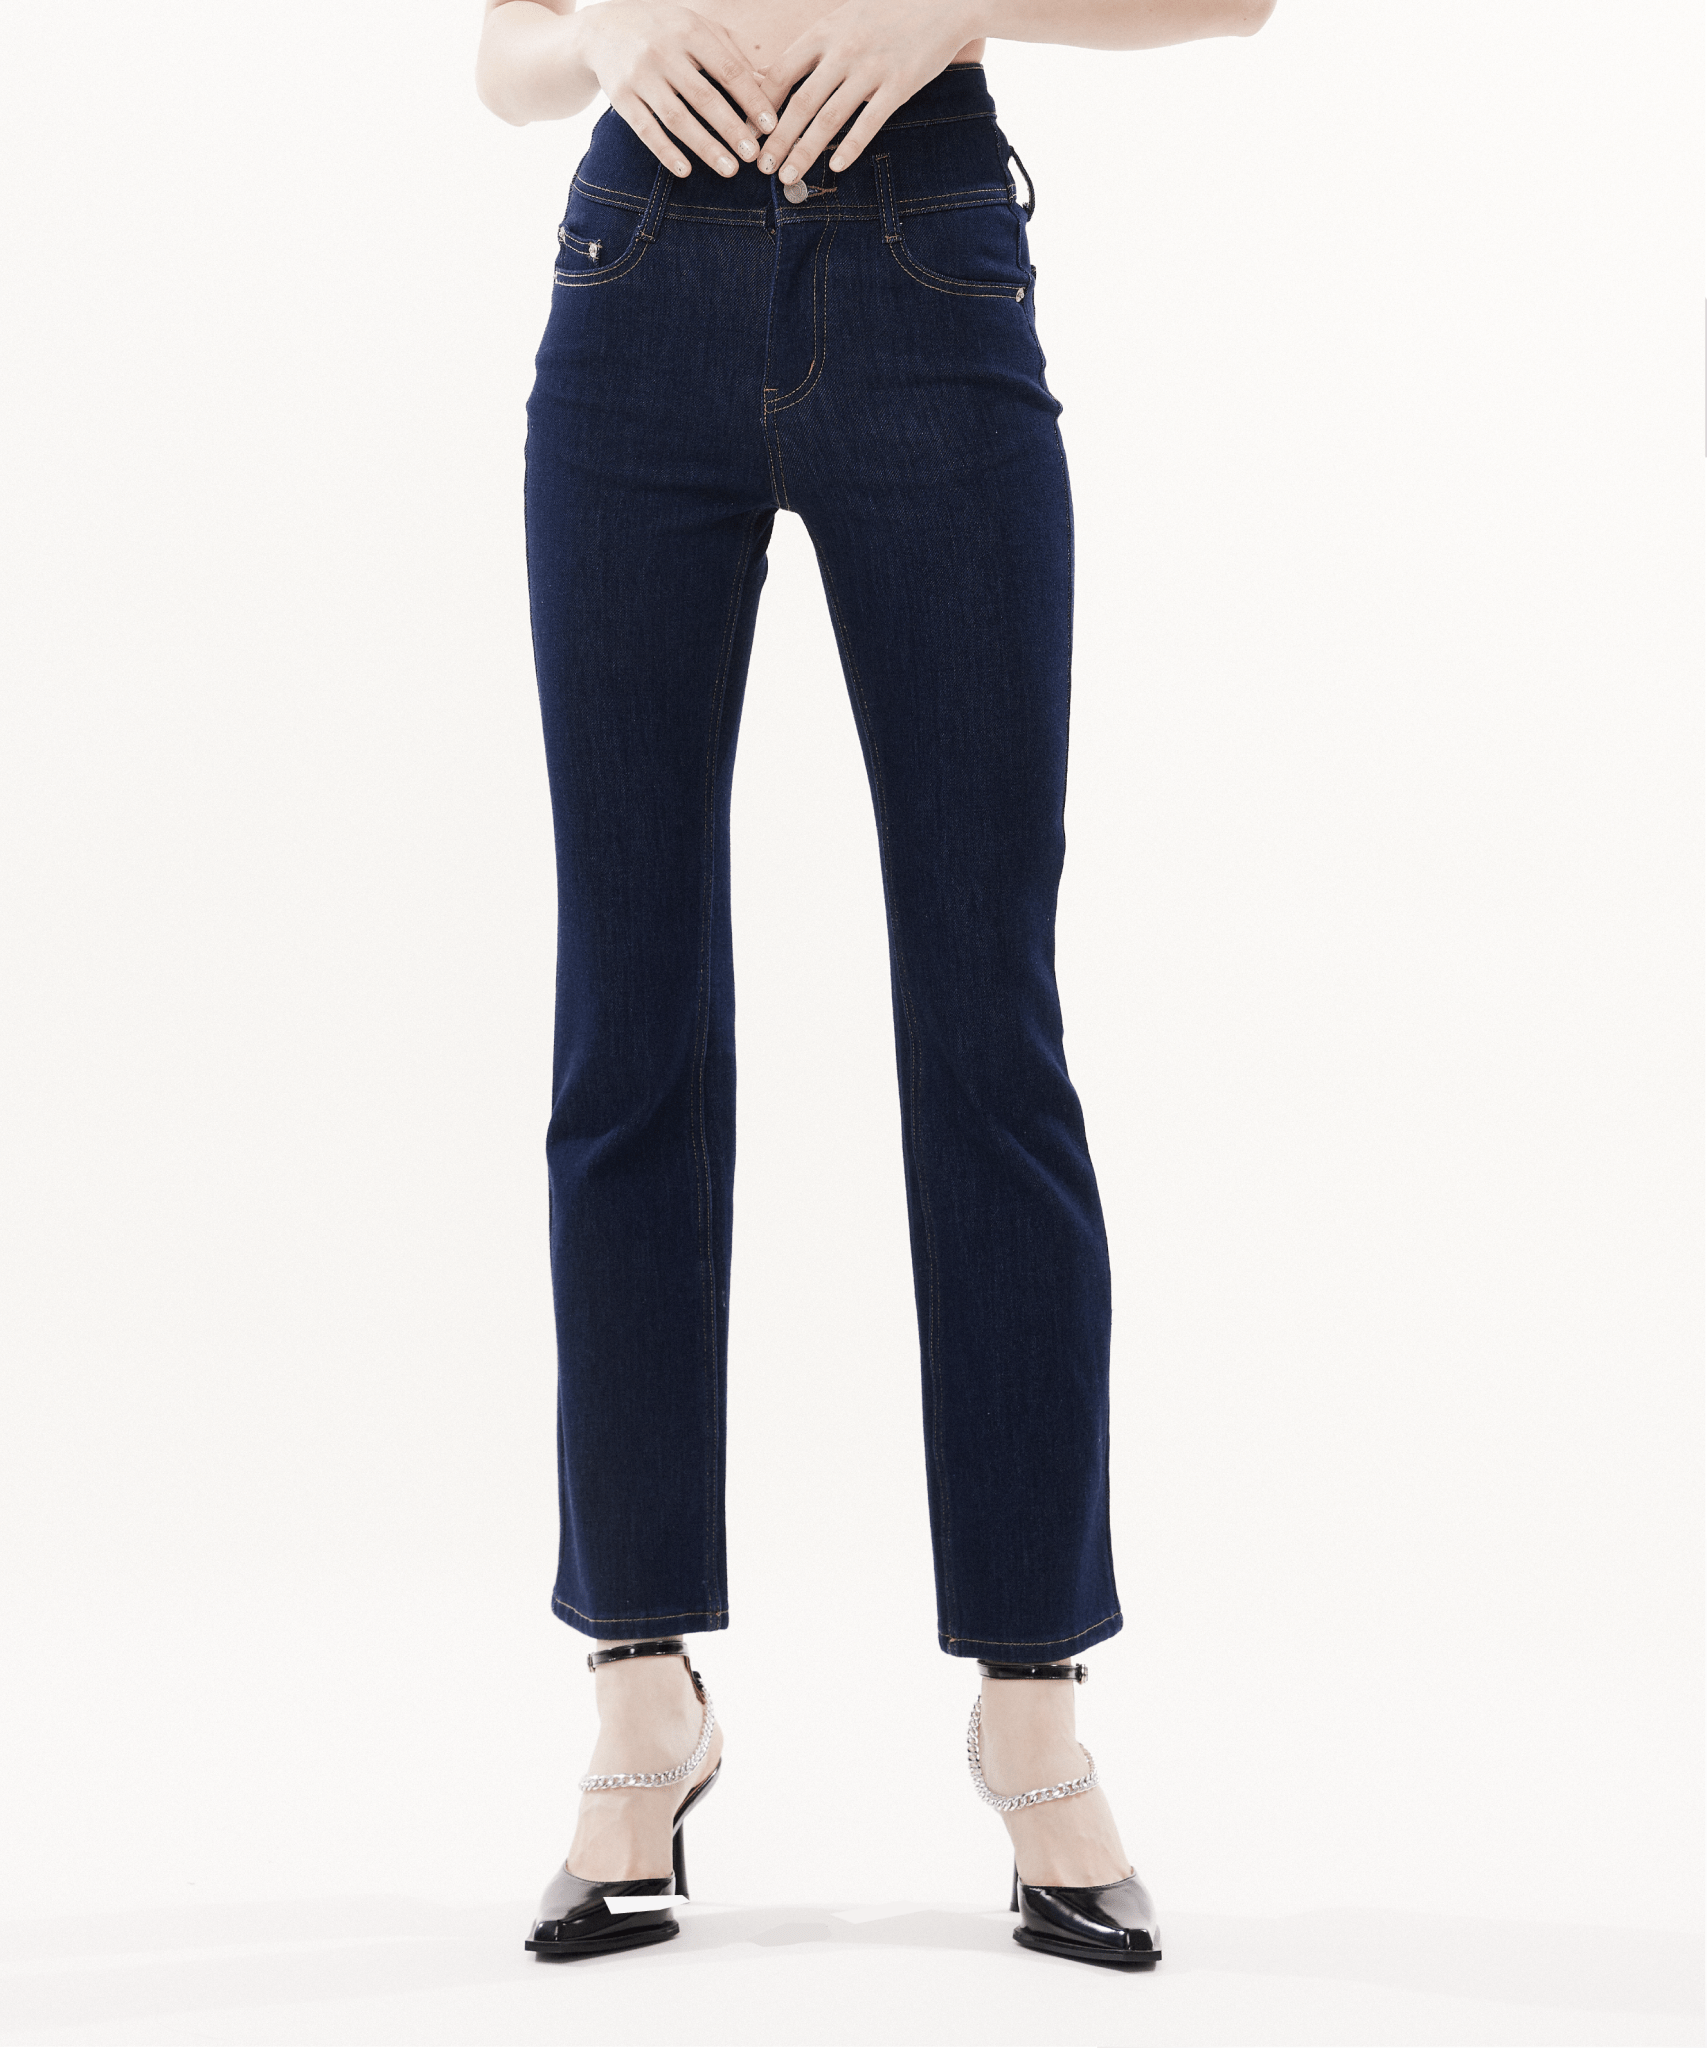 High-waisted Vintage Stretch Flared Jeans - LOVE POMME POMME